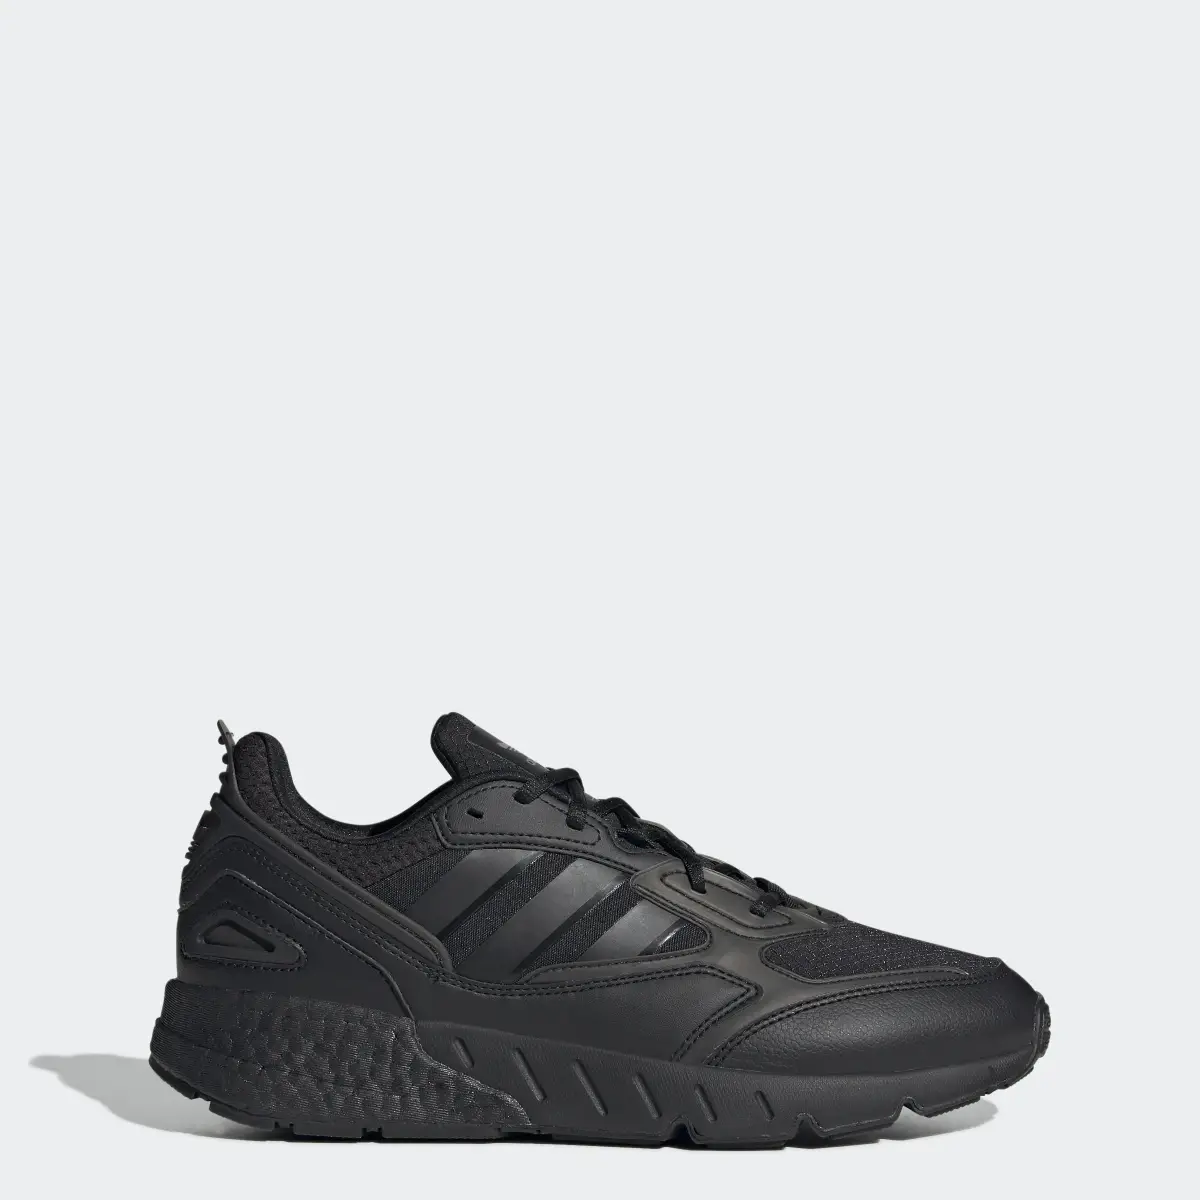 Adidas ZX 1K Boost 2.0 Shoes. 1